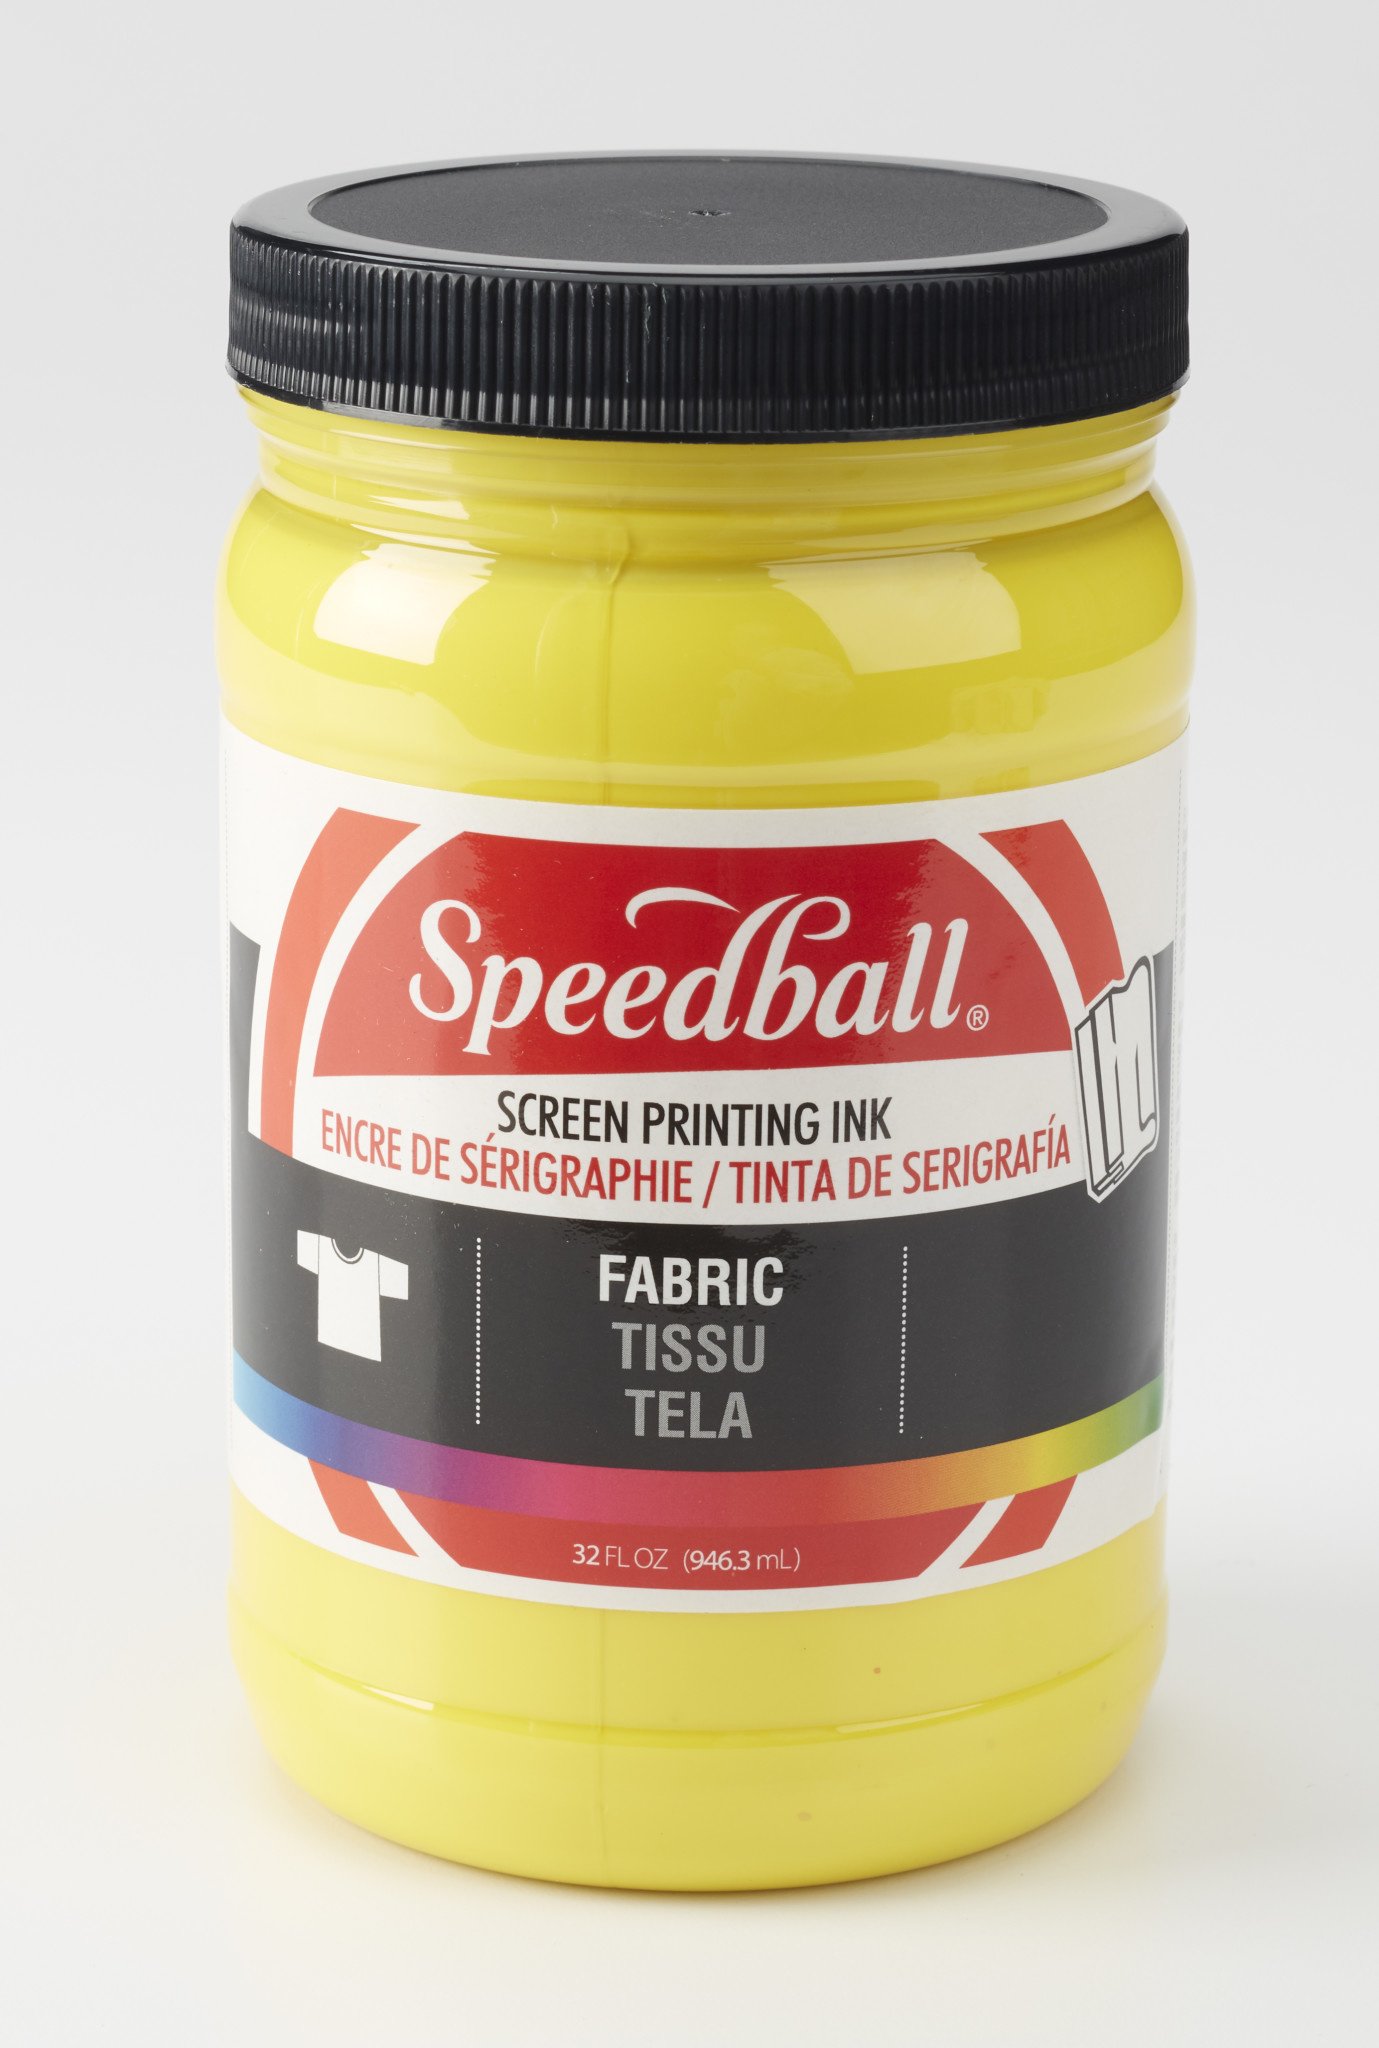 Speedball Fabric Screen Printing Inks and Sets